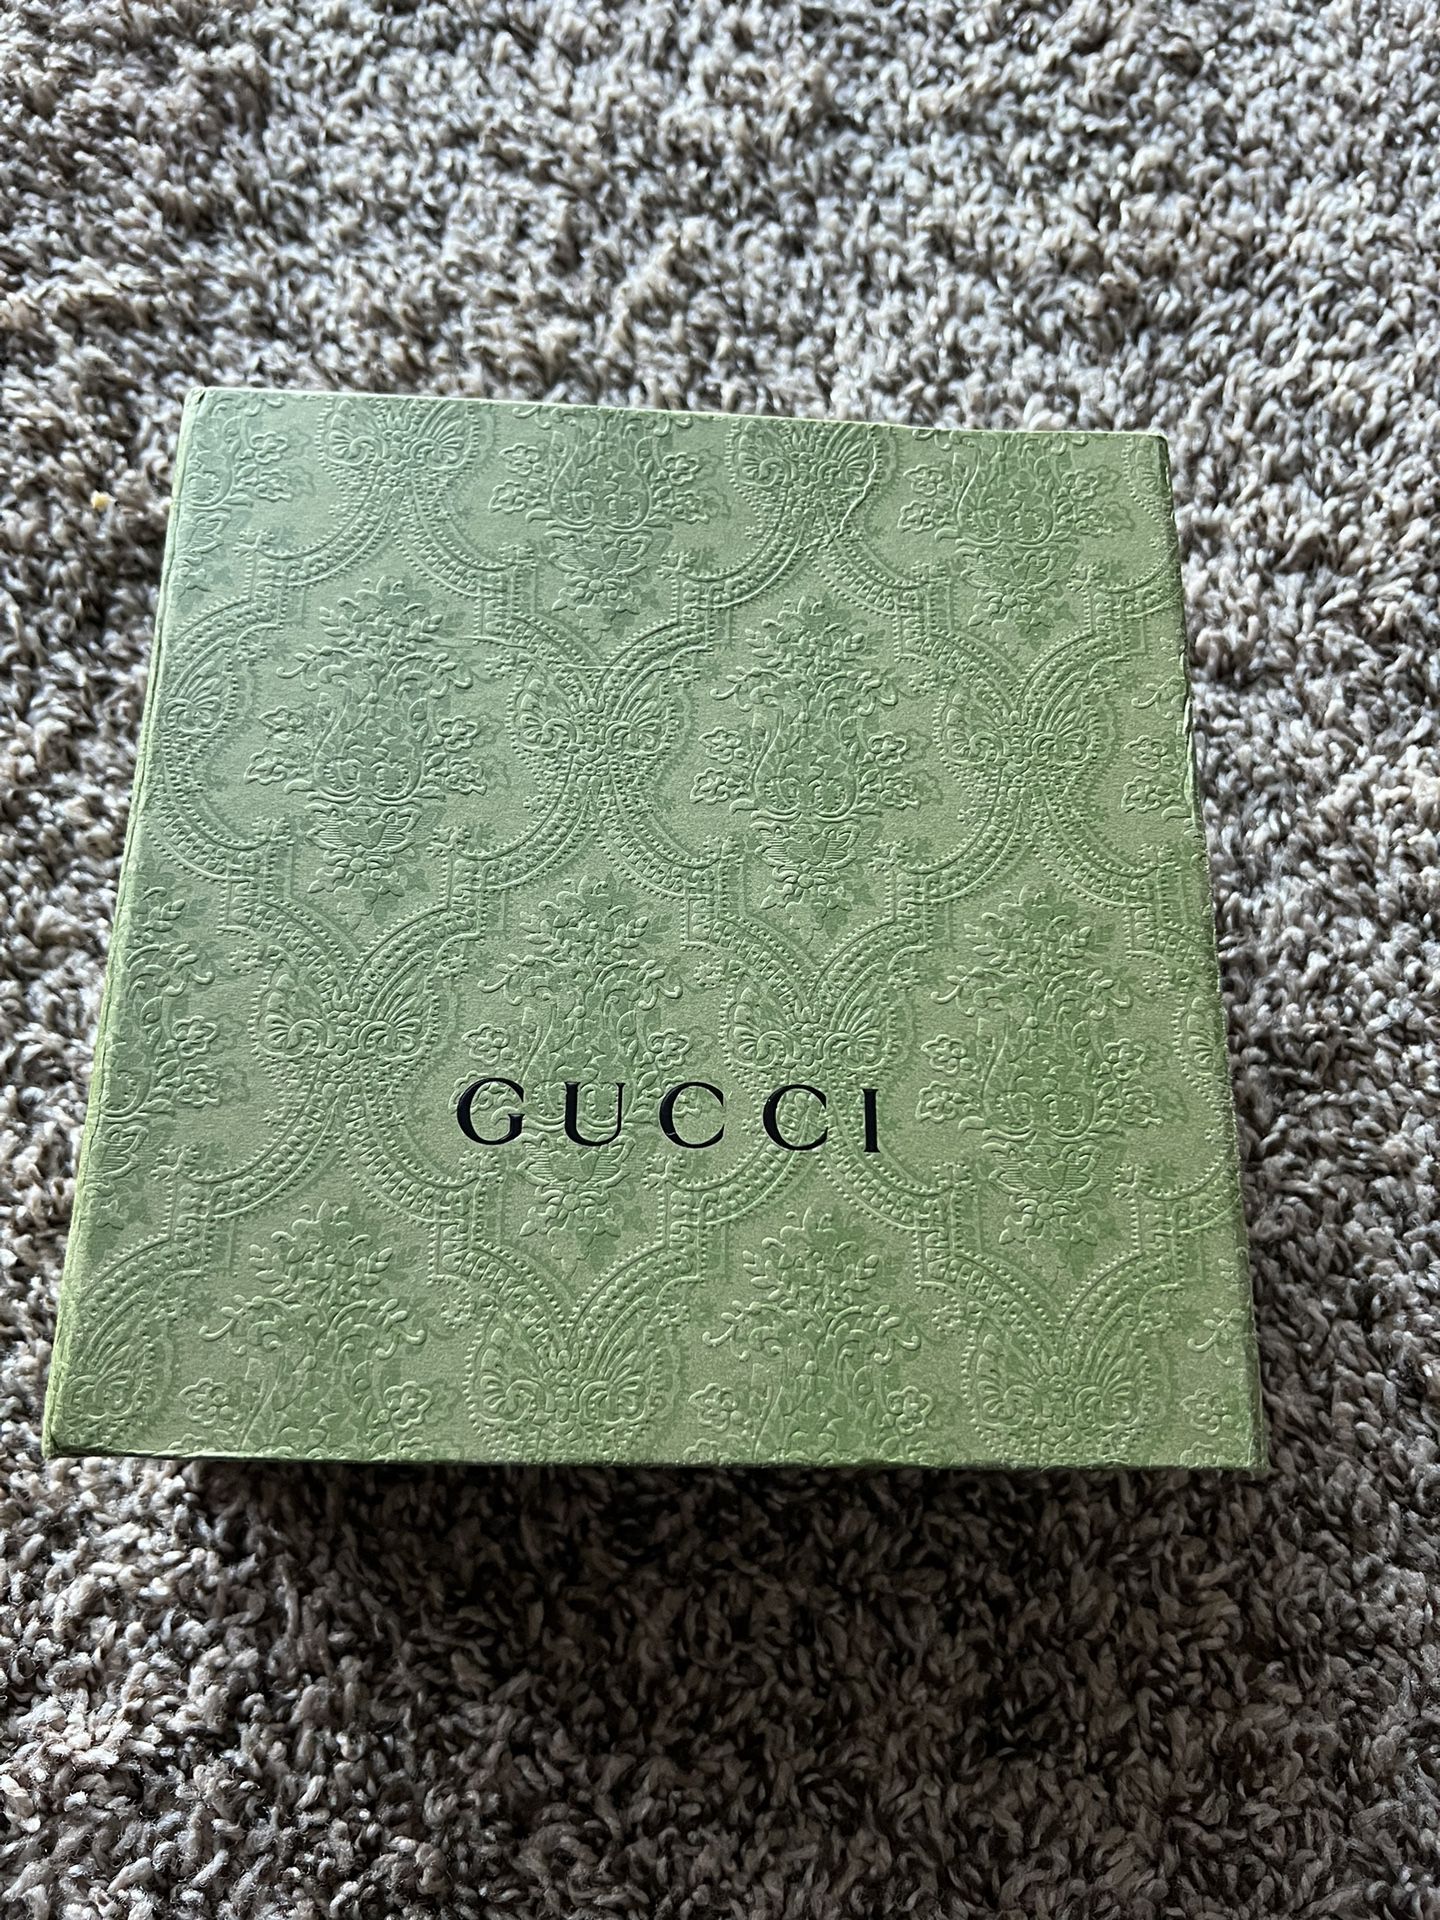 Gucci double G Snake Buckle Belt